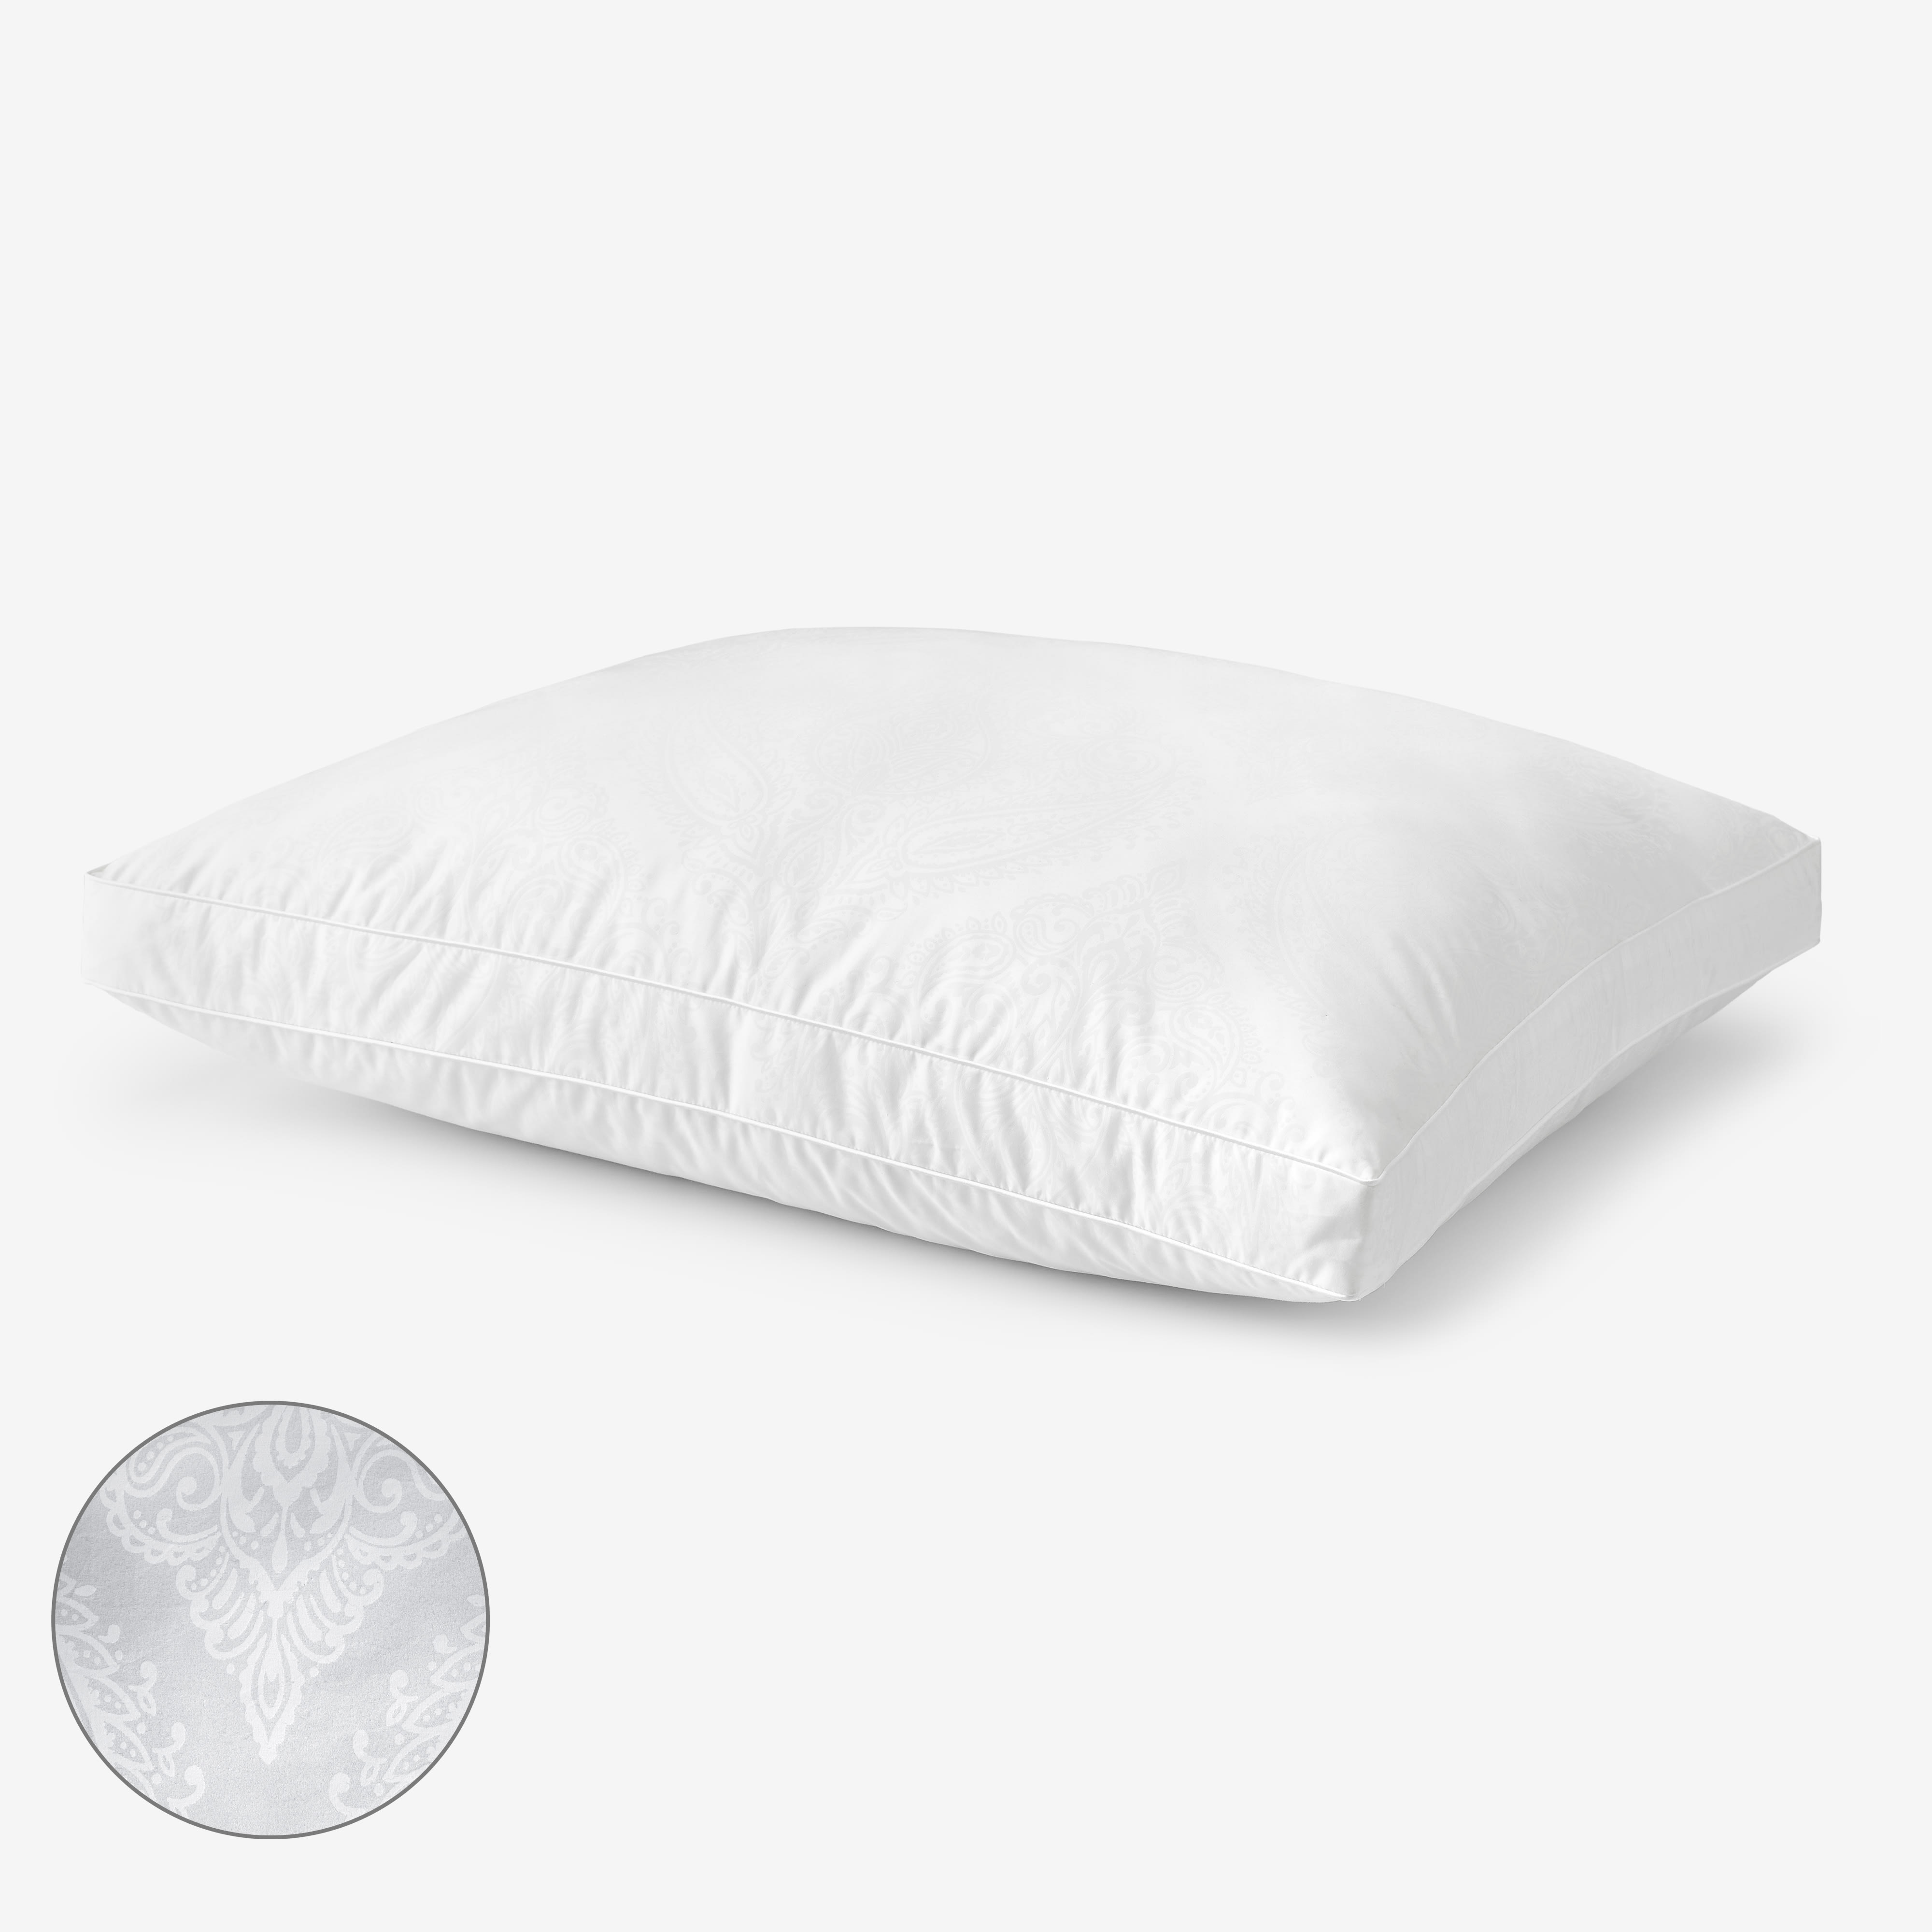 2 Pack,Standard size Retain in Shape 100% Cotton Shell Dust Mite Resistant Sfoothome Down Alternative Soft Bed Pillows Sleeping 